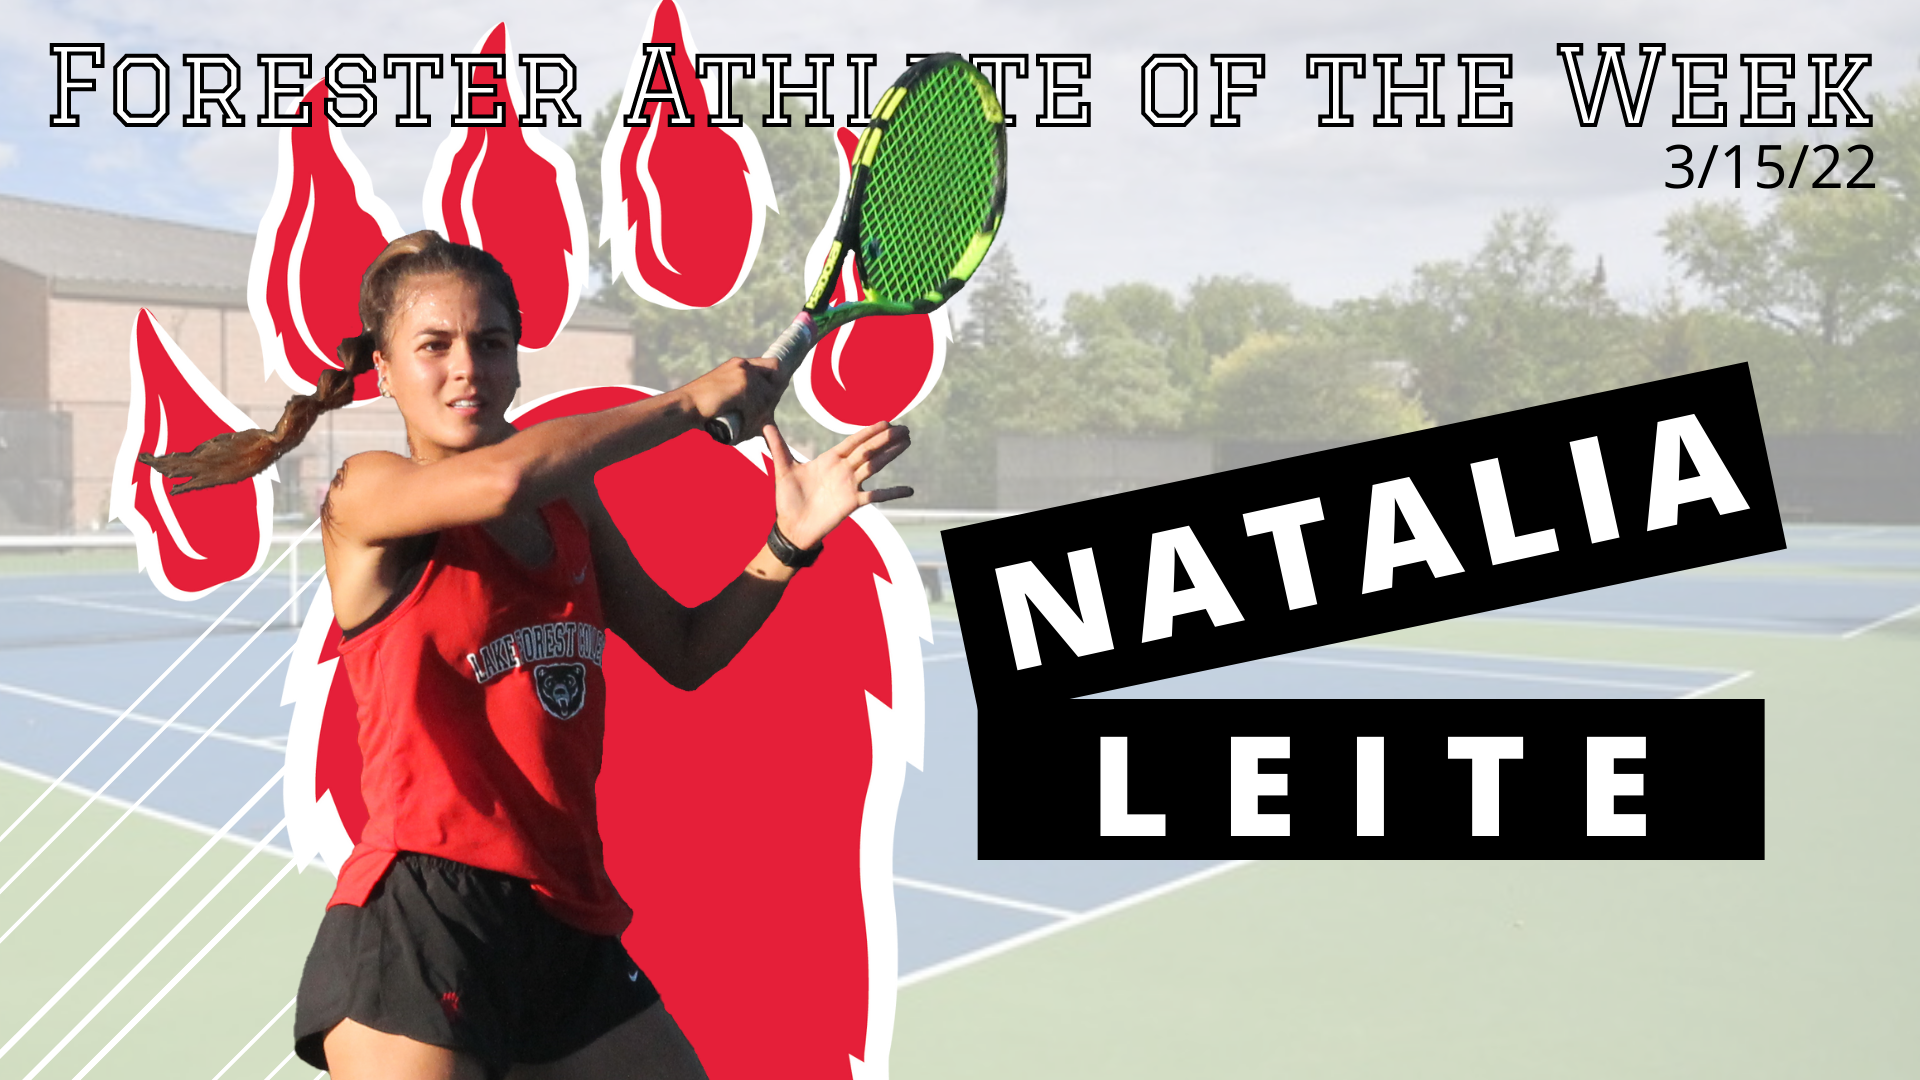 Natalia Leite Named Women's Forester Athlete of the Week